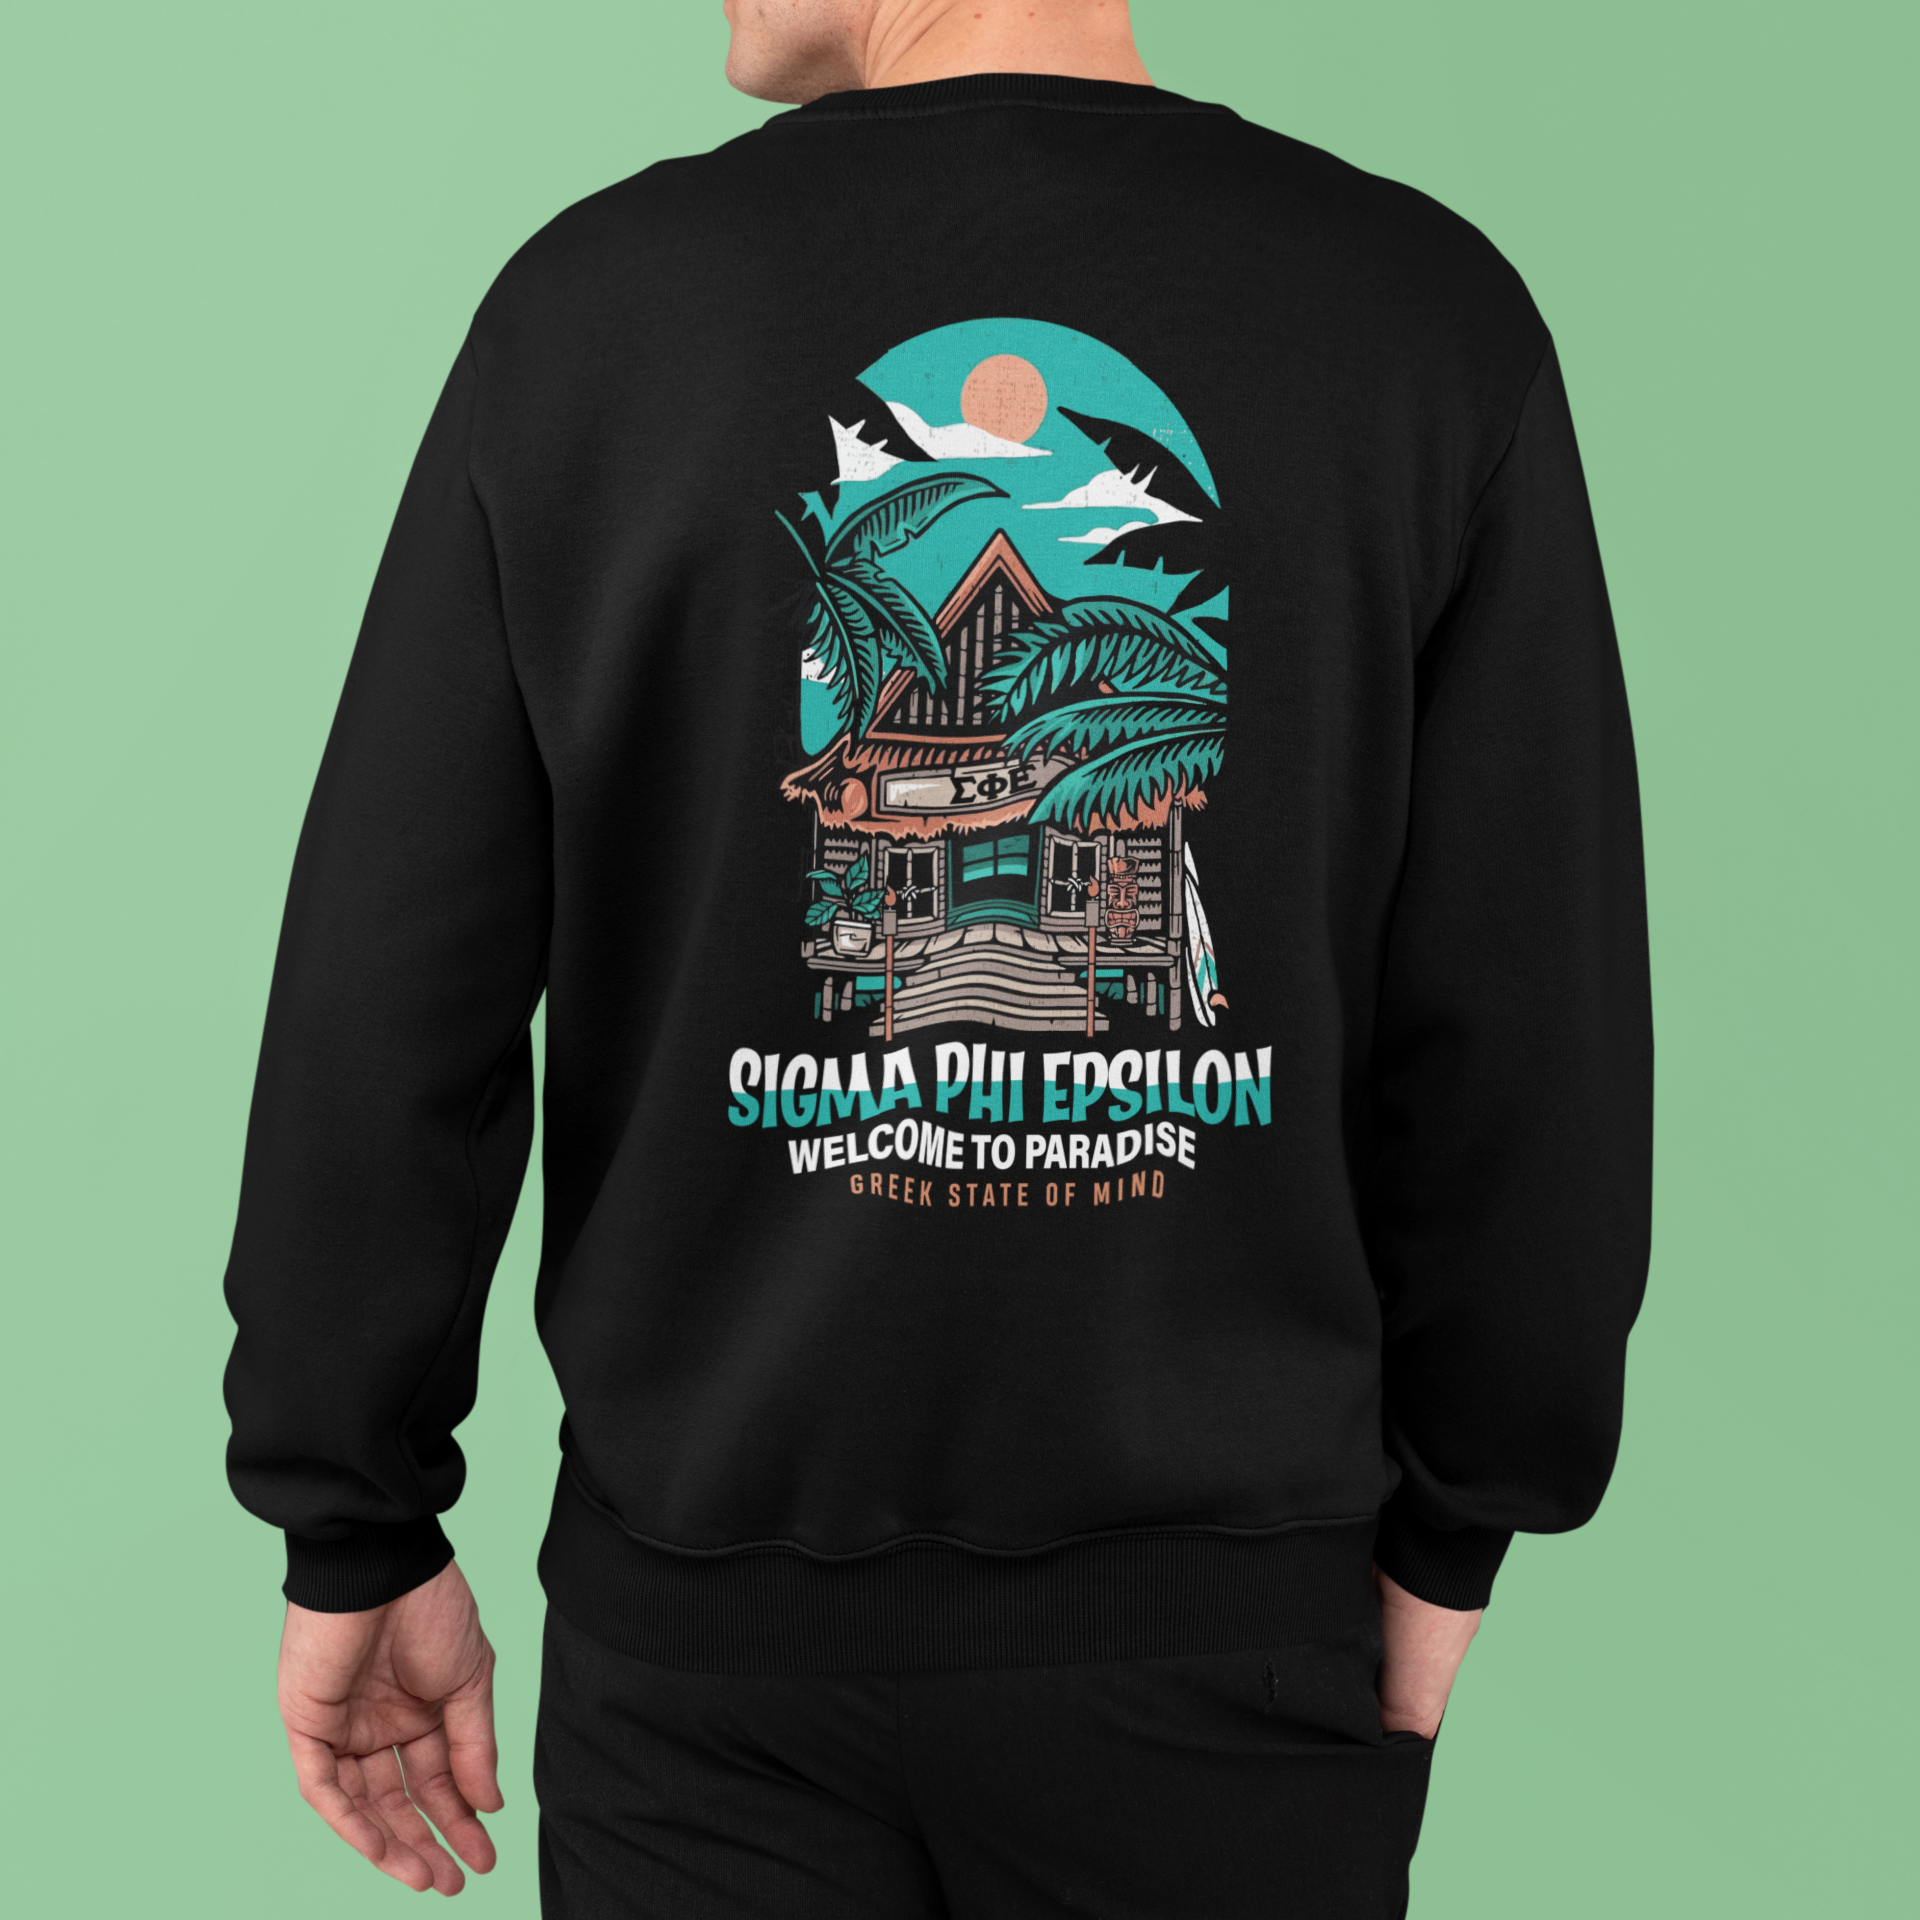 Sigma Phi Epsilon Graphic Crewneck Sweatshirt | Welcome to Paradise |  SigEp Fraternity Clothes and Merchandise back model 